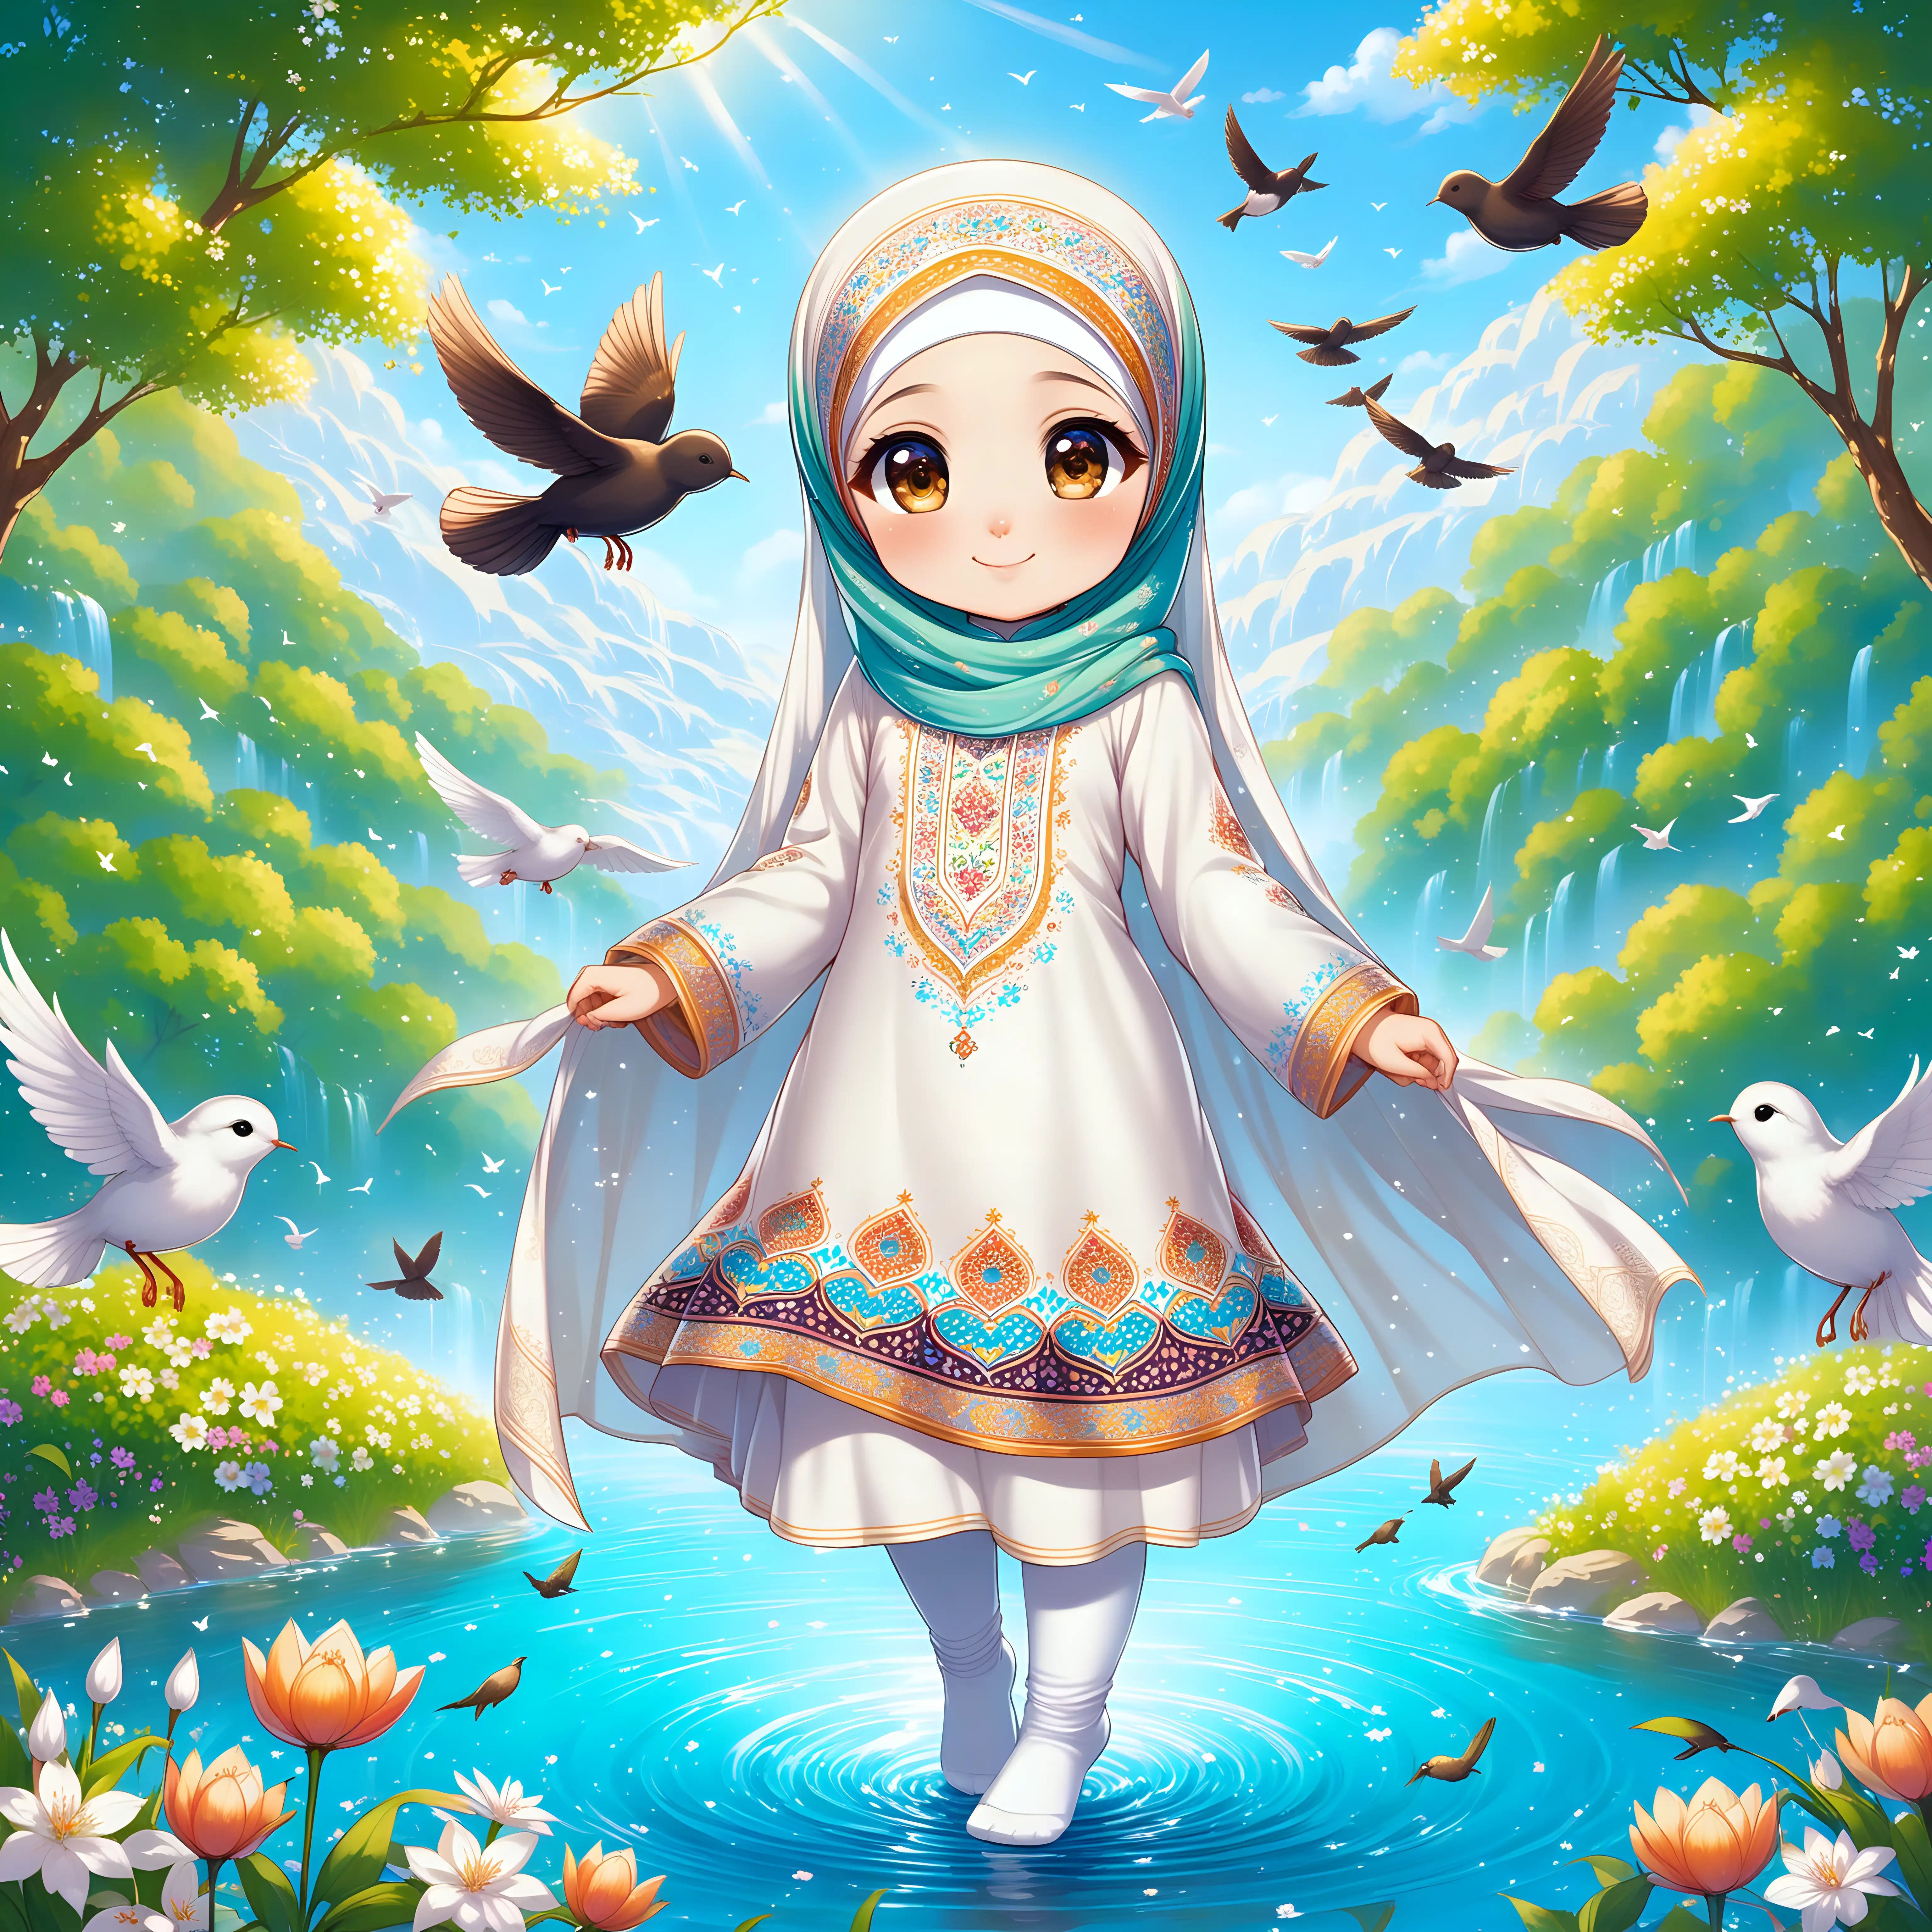 Persian Little Girl by the Spring Joyful Scene of Traditional Attire and Natures Beauty